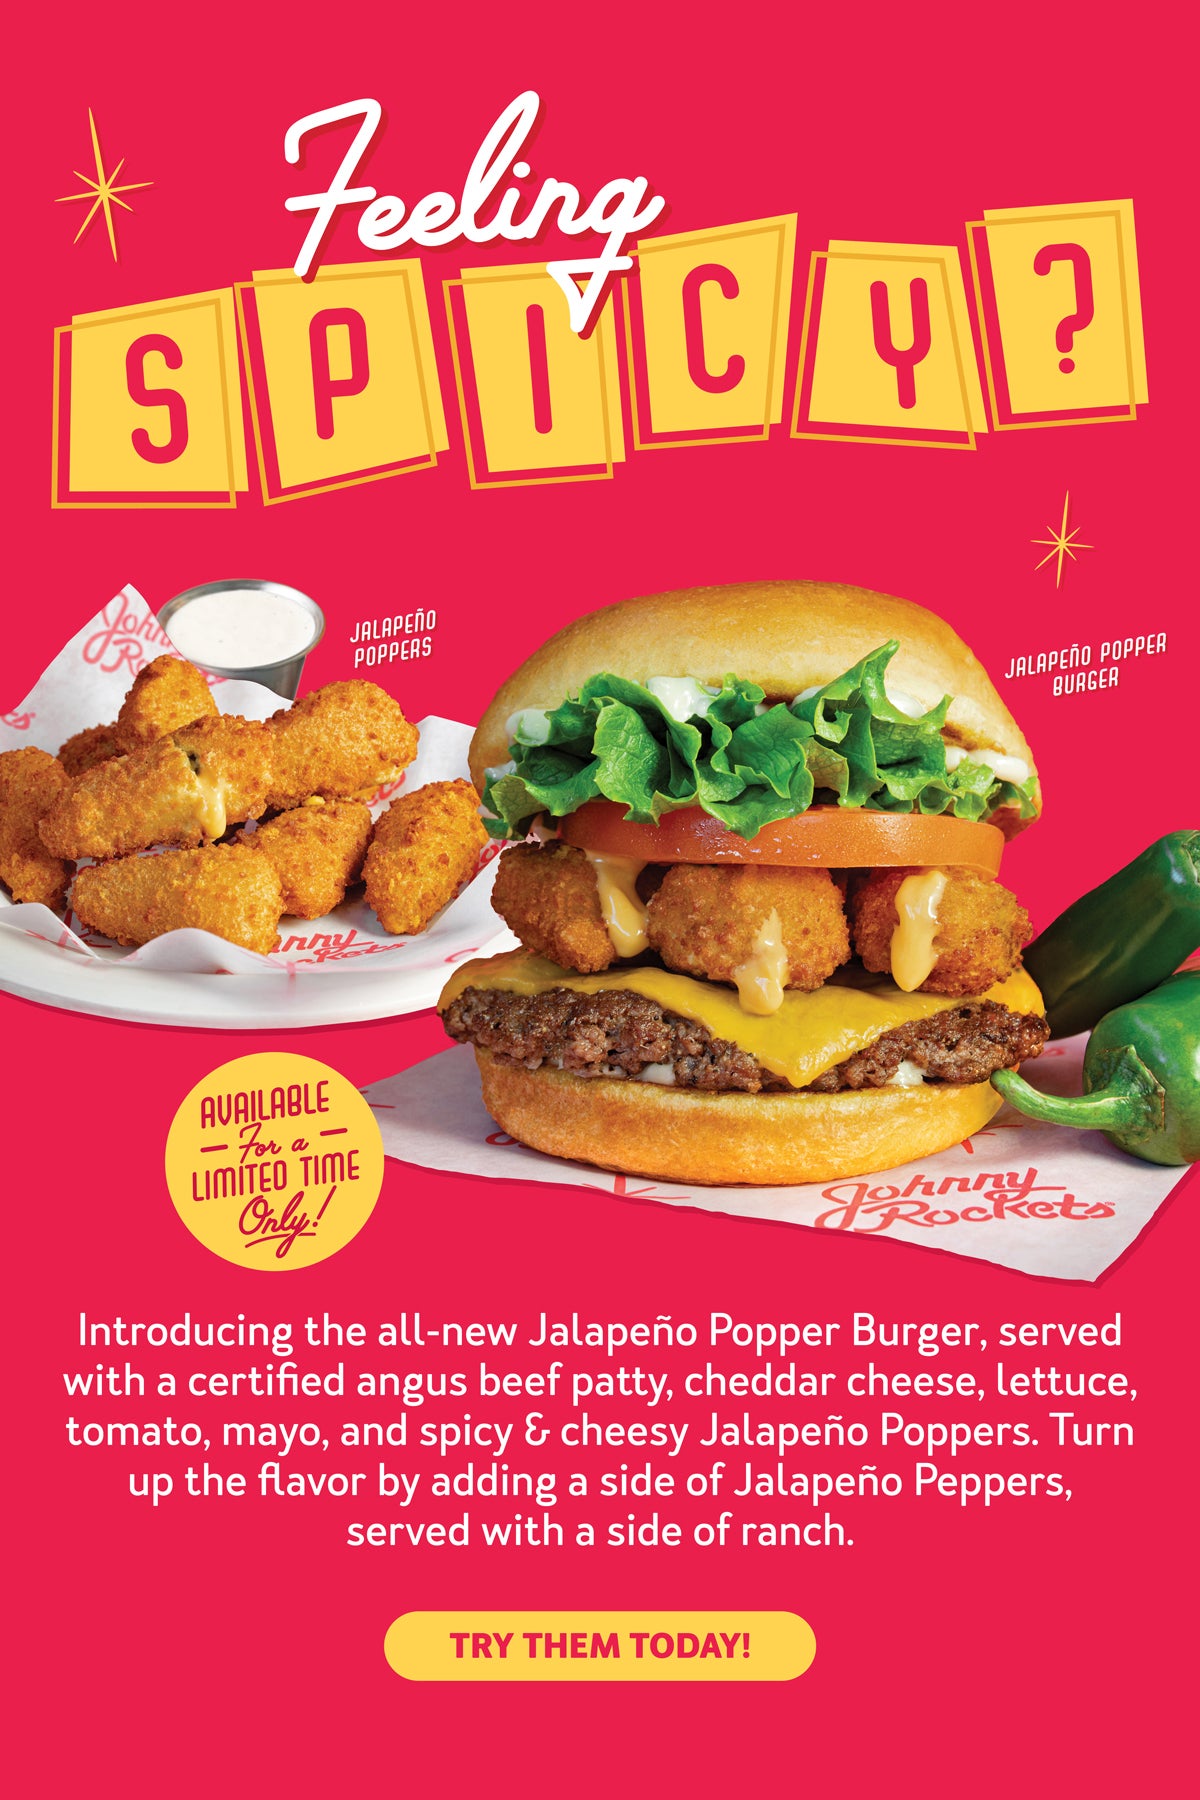 Try Our All-New Jalapeo Popper Burger and Jalapeo Poppers - available for a limited time only!